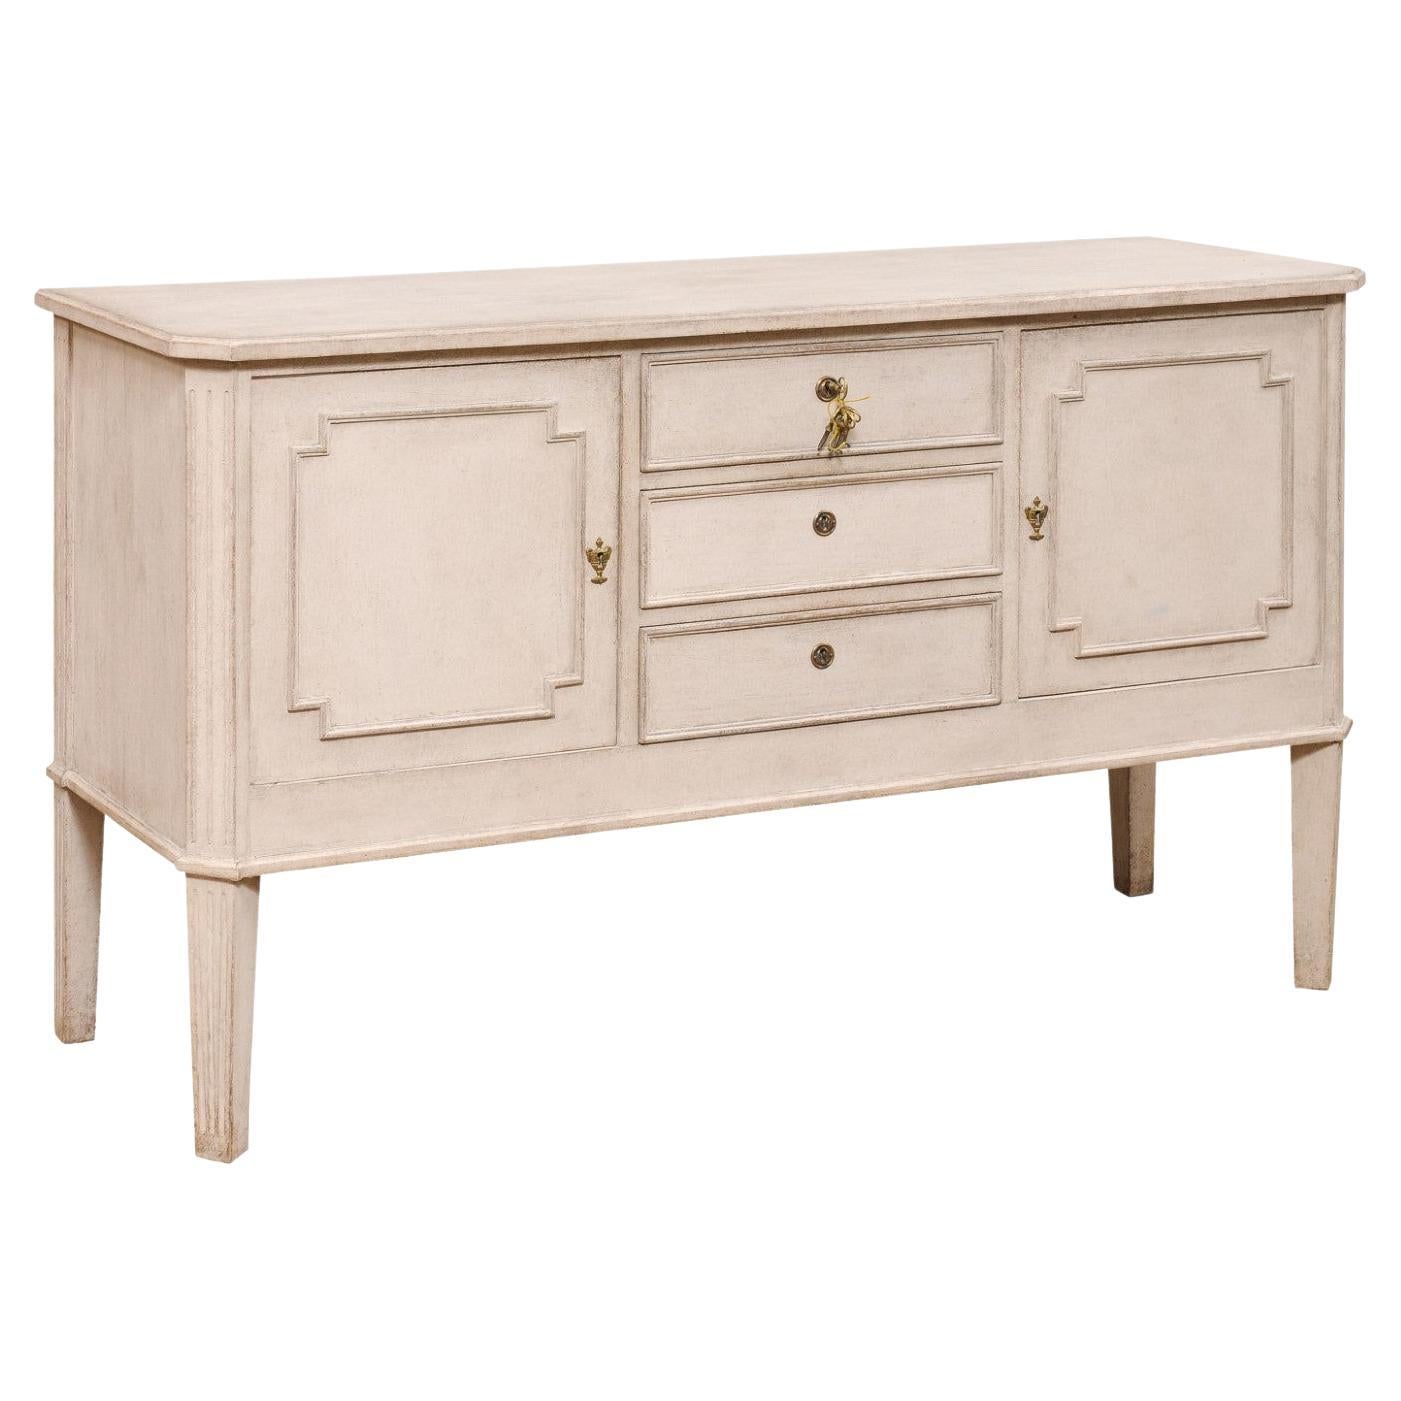 Swedish 19th Century Gustavian Style Sideboard with Three Drawers and Two Doors